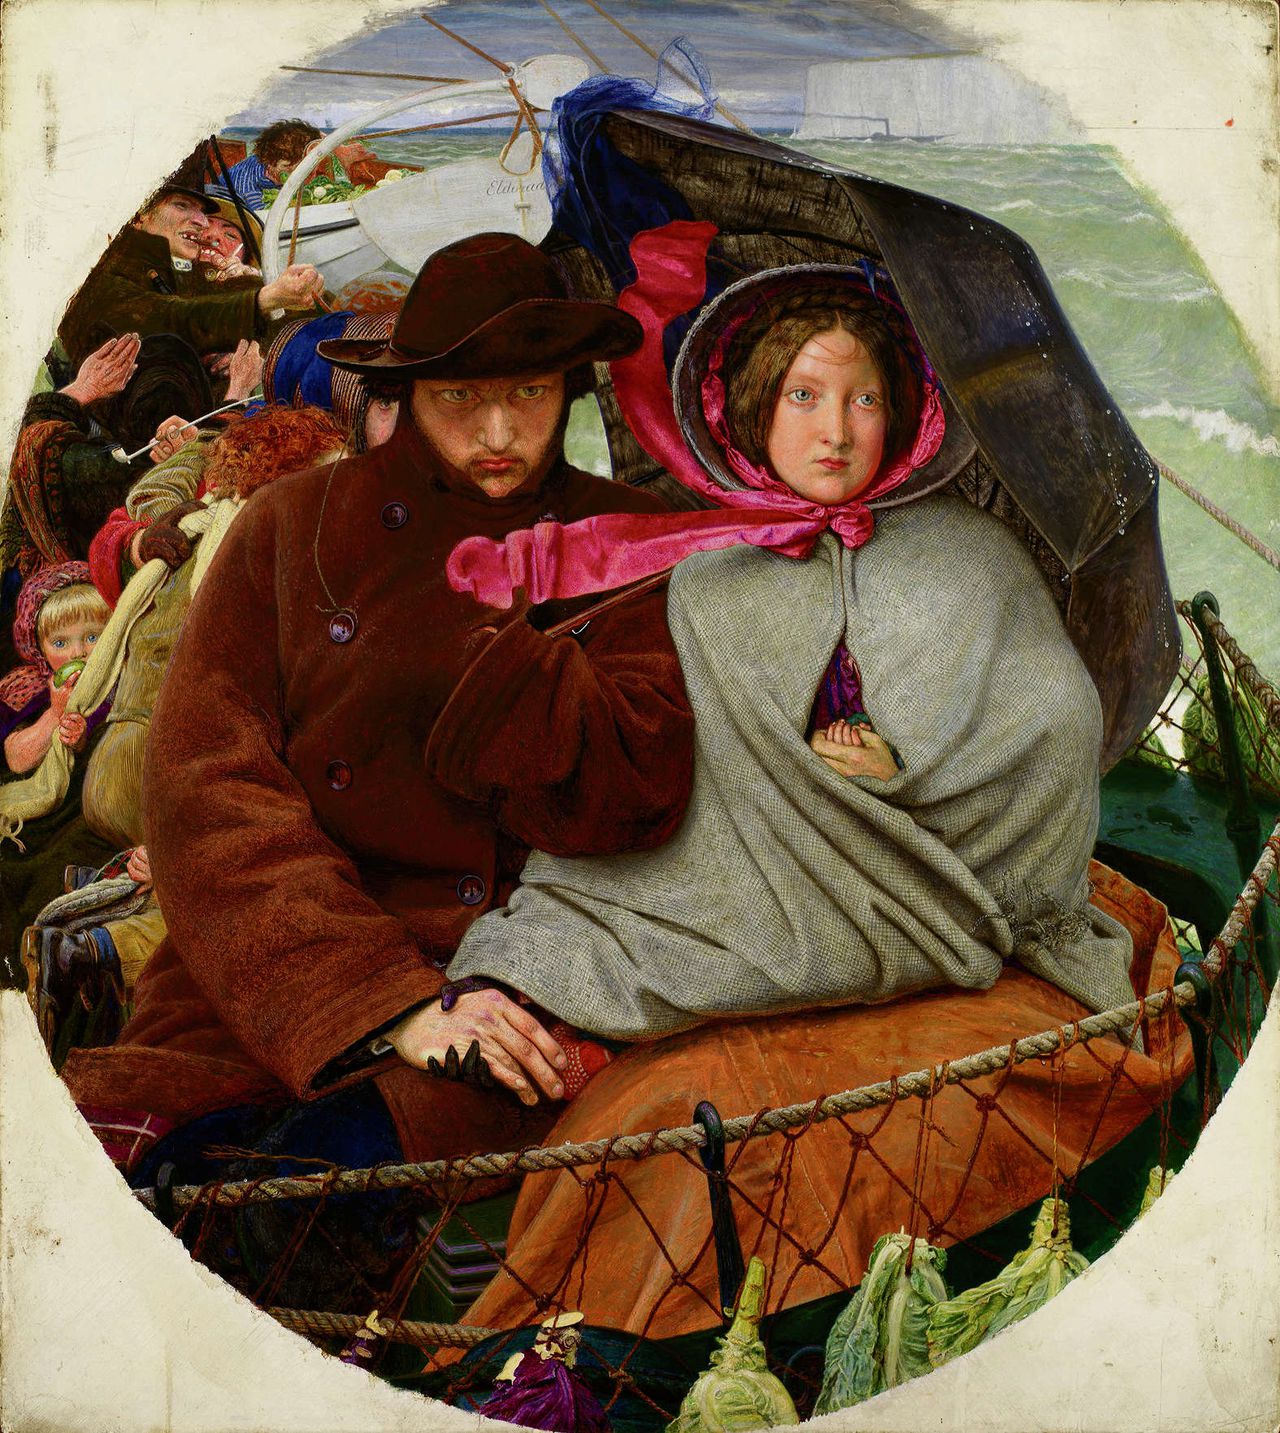 Ford Madox Brown: ‘The last of England’ (1855)